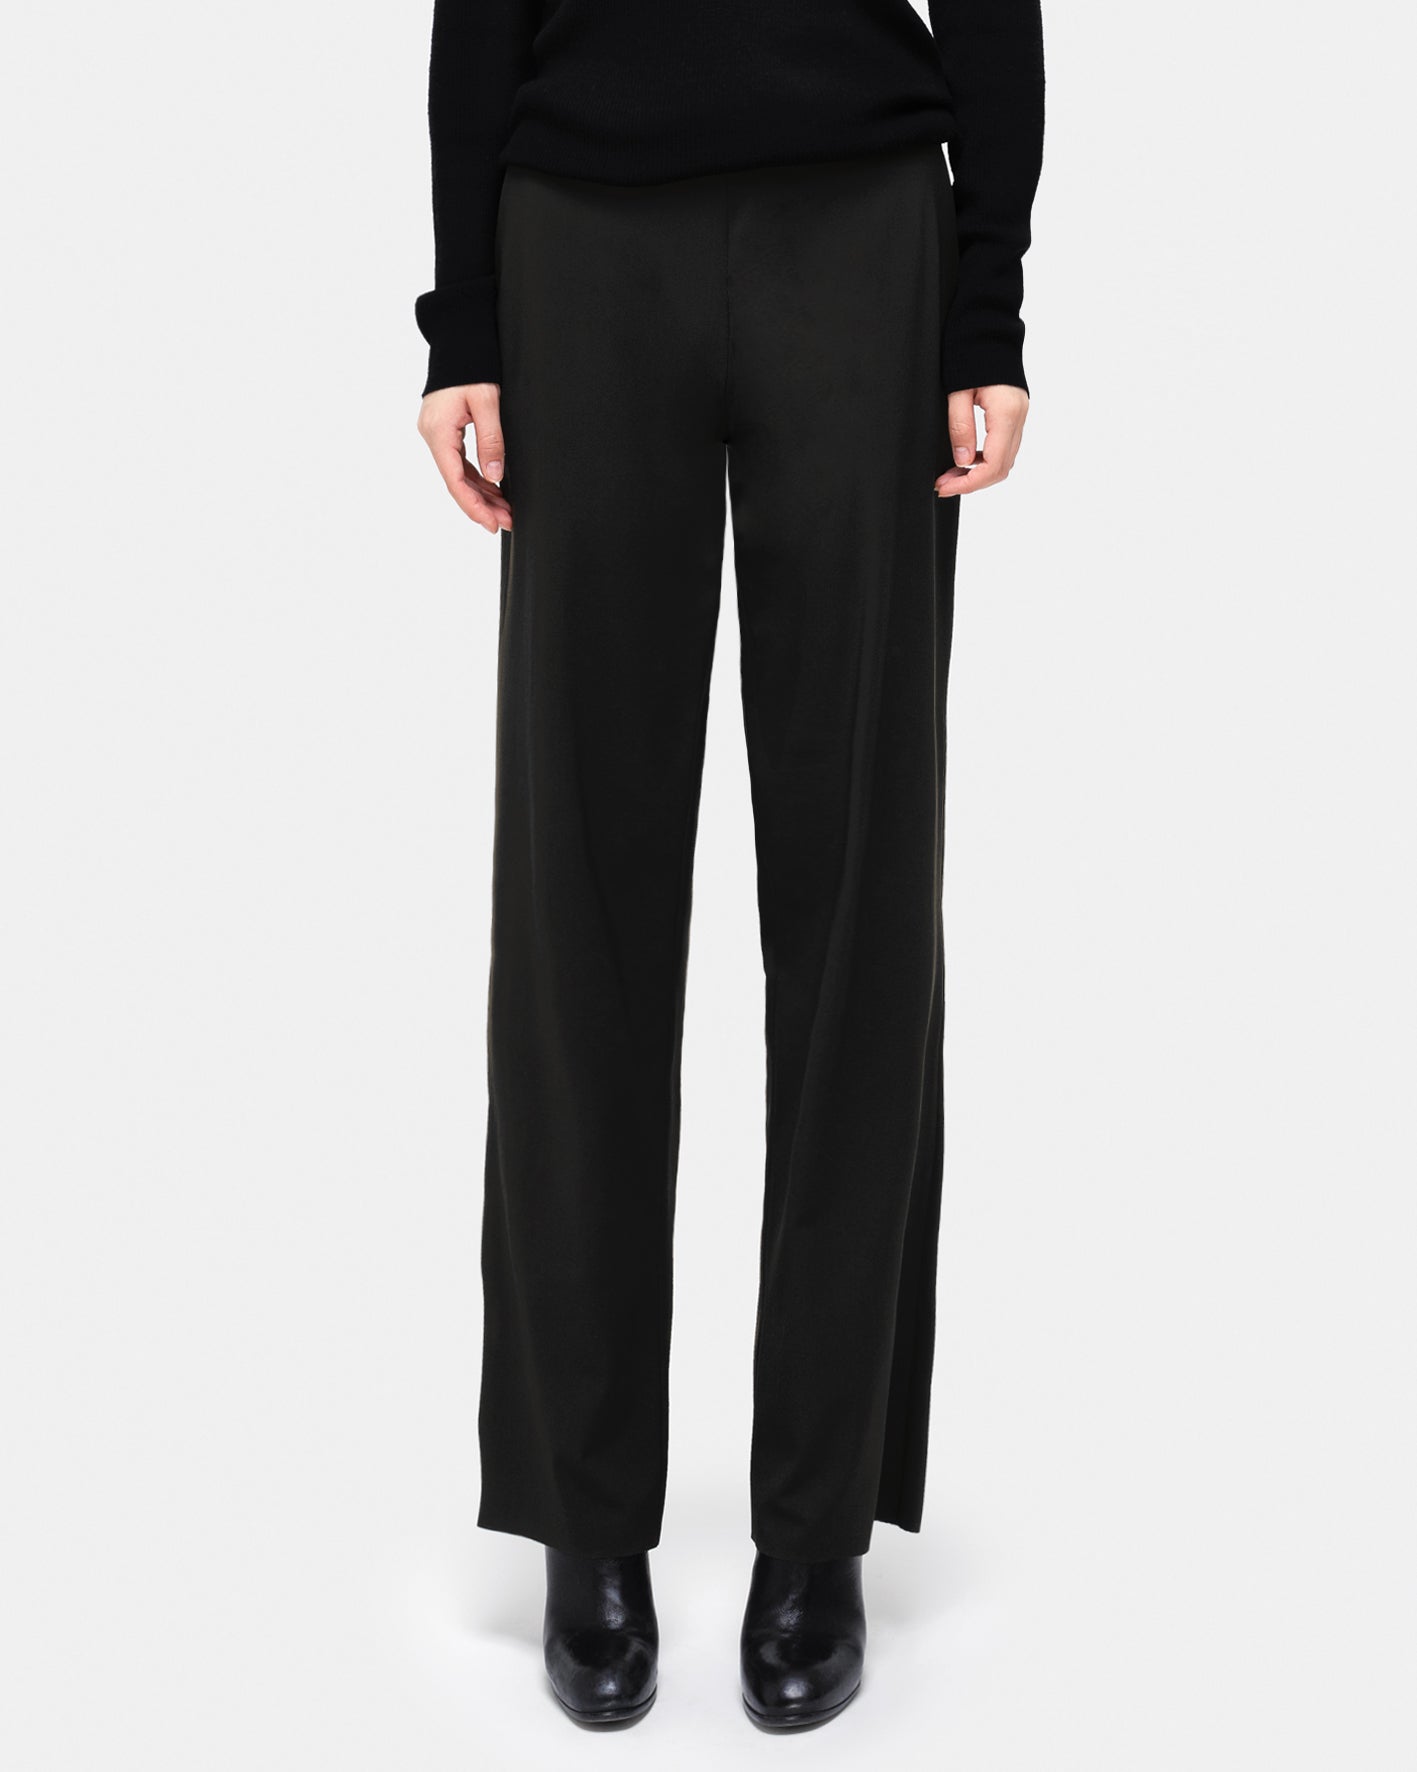 STRAIGHT TROUSERS, Black